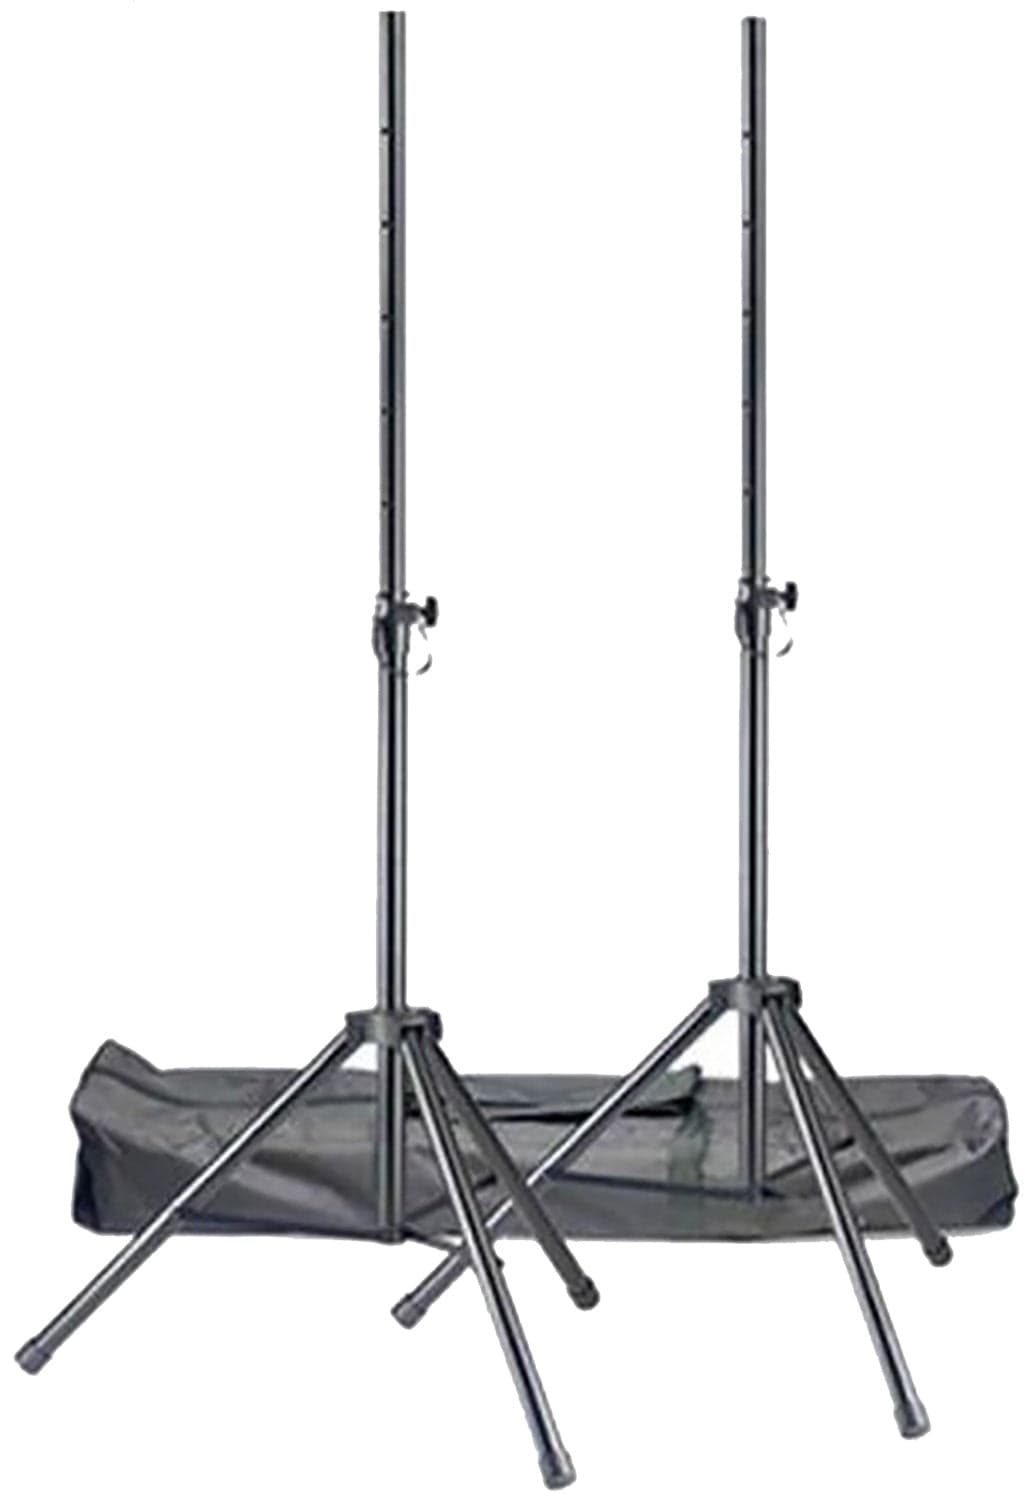 Electro-Voice ETX-15P 15-Inch Powered Speaker (x2) with Stands and Cables - PSSL ProSound and Stage Lighting